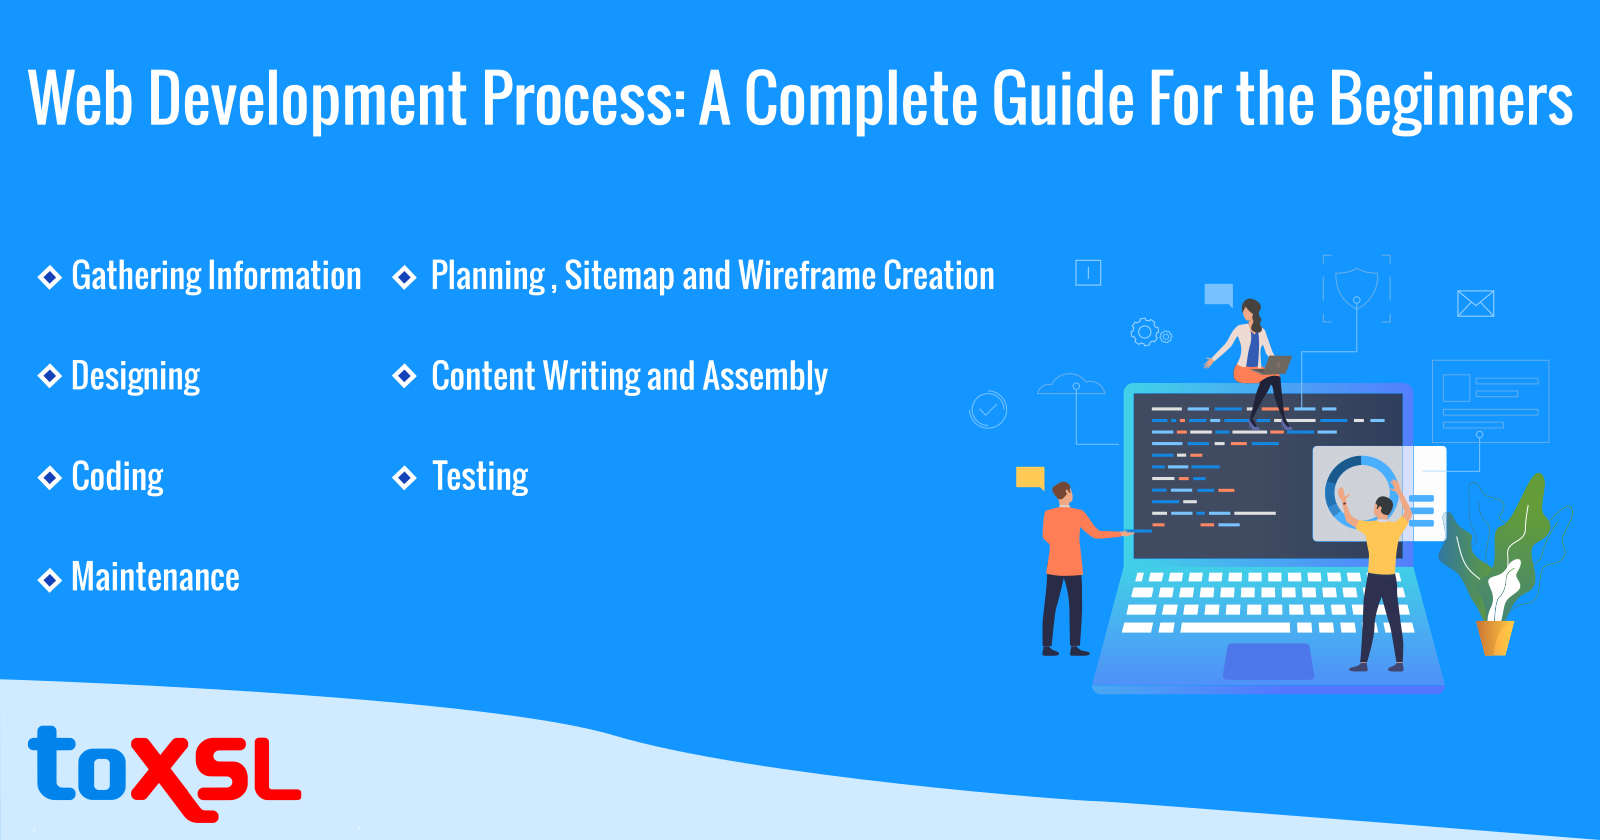 Web Development Process: A Complete Guide For the Beginners